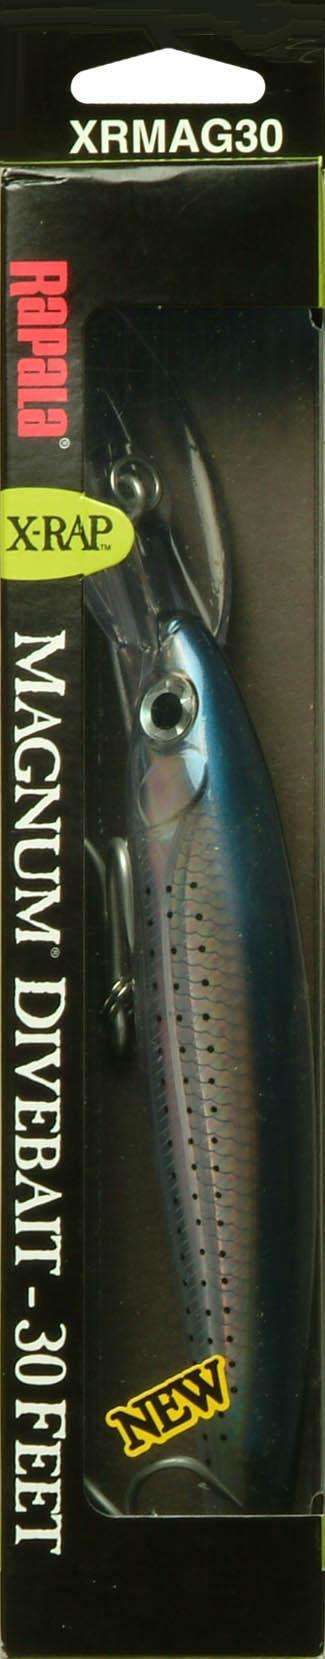 Rapala Spotted Minnow X-Rap Magnum 30 Fishing Lure 2.5 Ounce 6.25